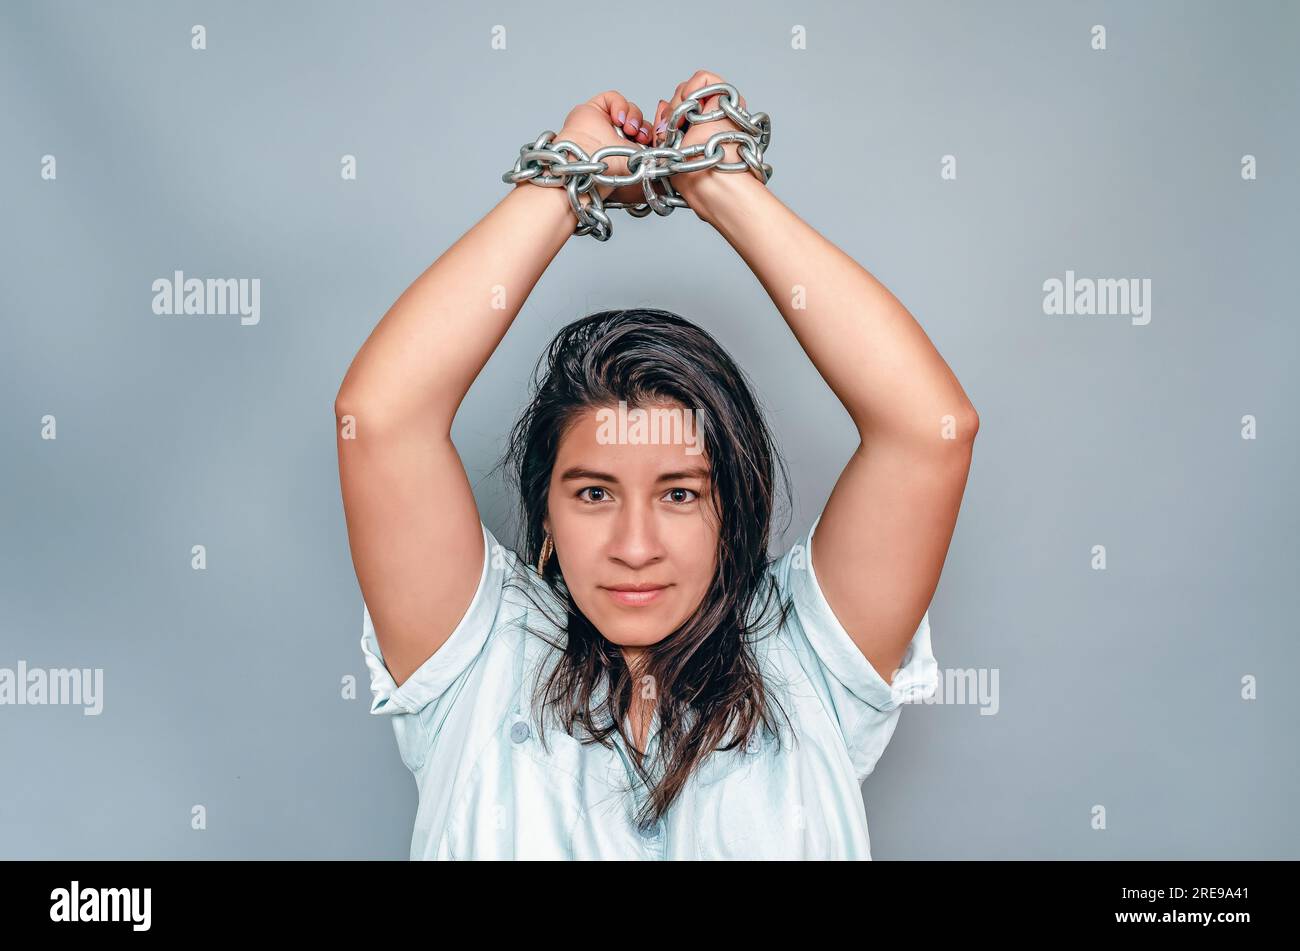 Woman in Chains stock photo. Image of expression, horror - 12466838